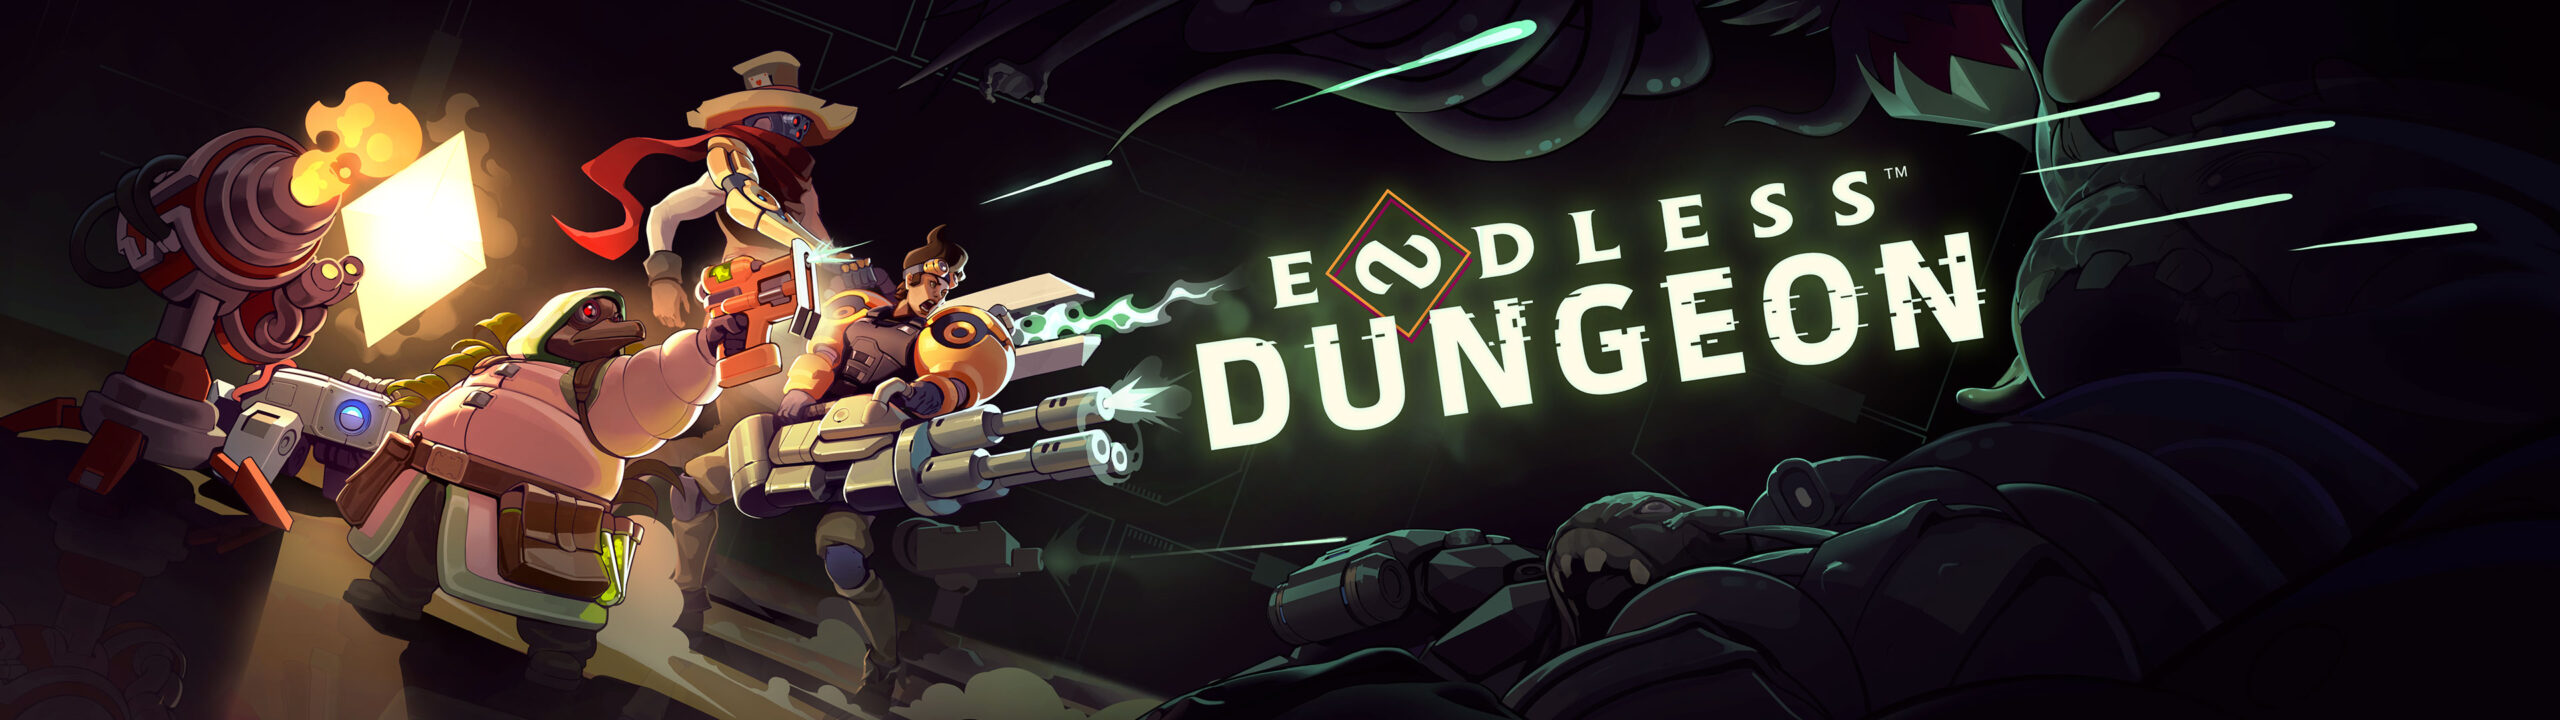 ENDLESS-DUNGEON-IS-NOW-AVAILABLE-FOR-PRE-PURCHASE-Cover